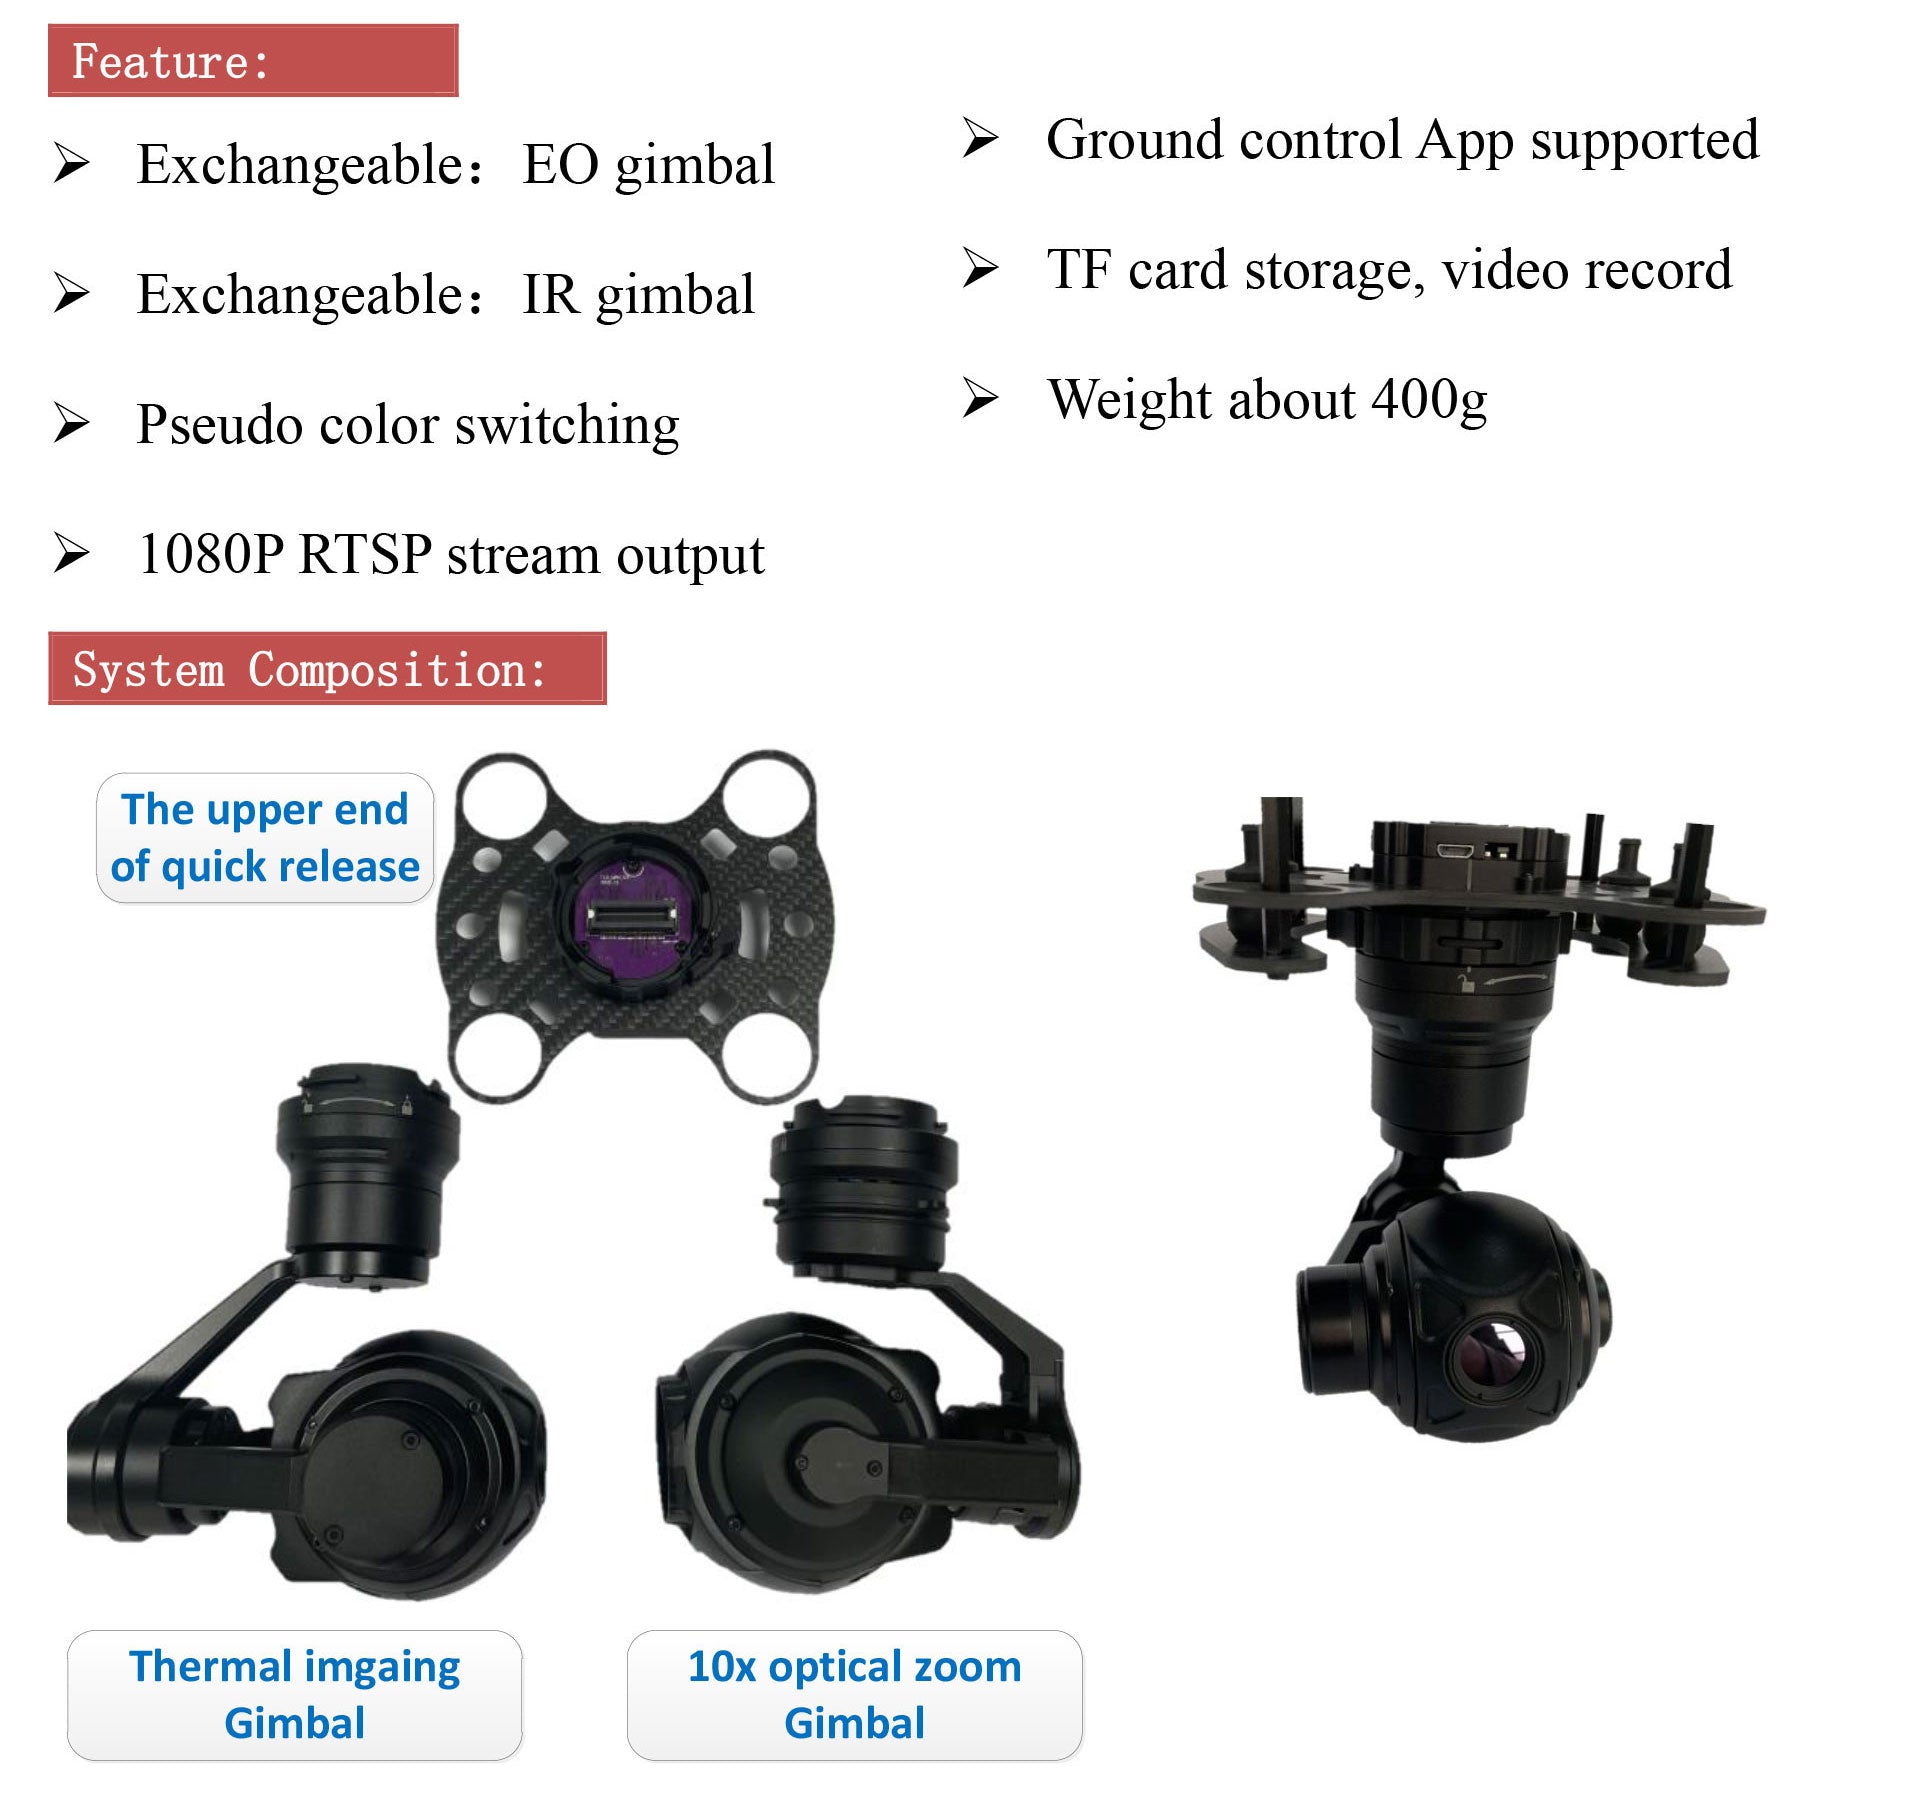 TOPOTEK KIP10-G6 Drone Camera Gimbal, Thermal camera features interchangeable gimbals, video recording, and RTSP streaming, weighing around 400g.